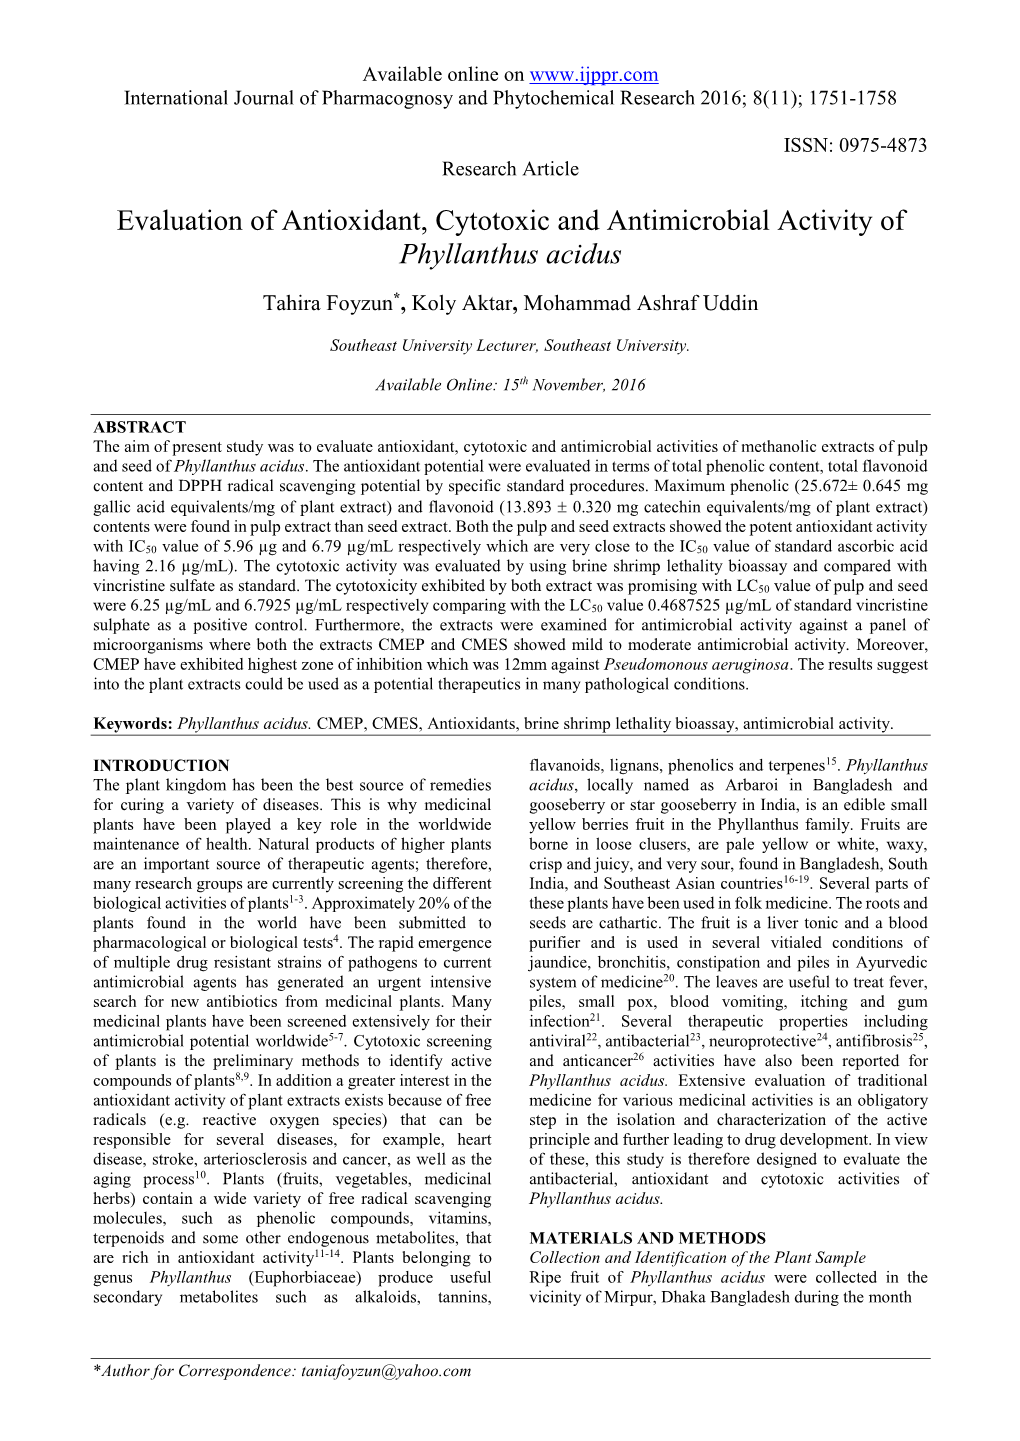 Evaluation of Antioxidant, Cytotoxic and Antimicrobial Activity of Phyllanthus Acidus